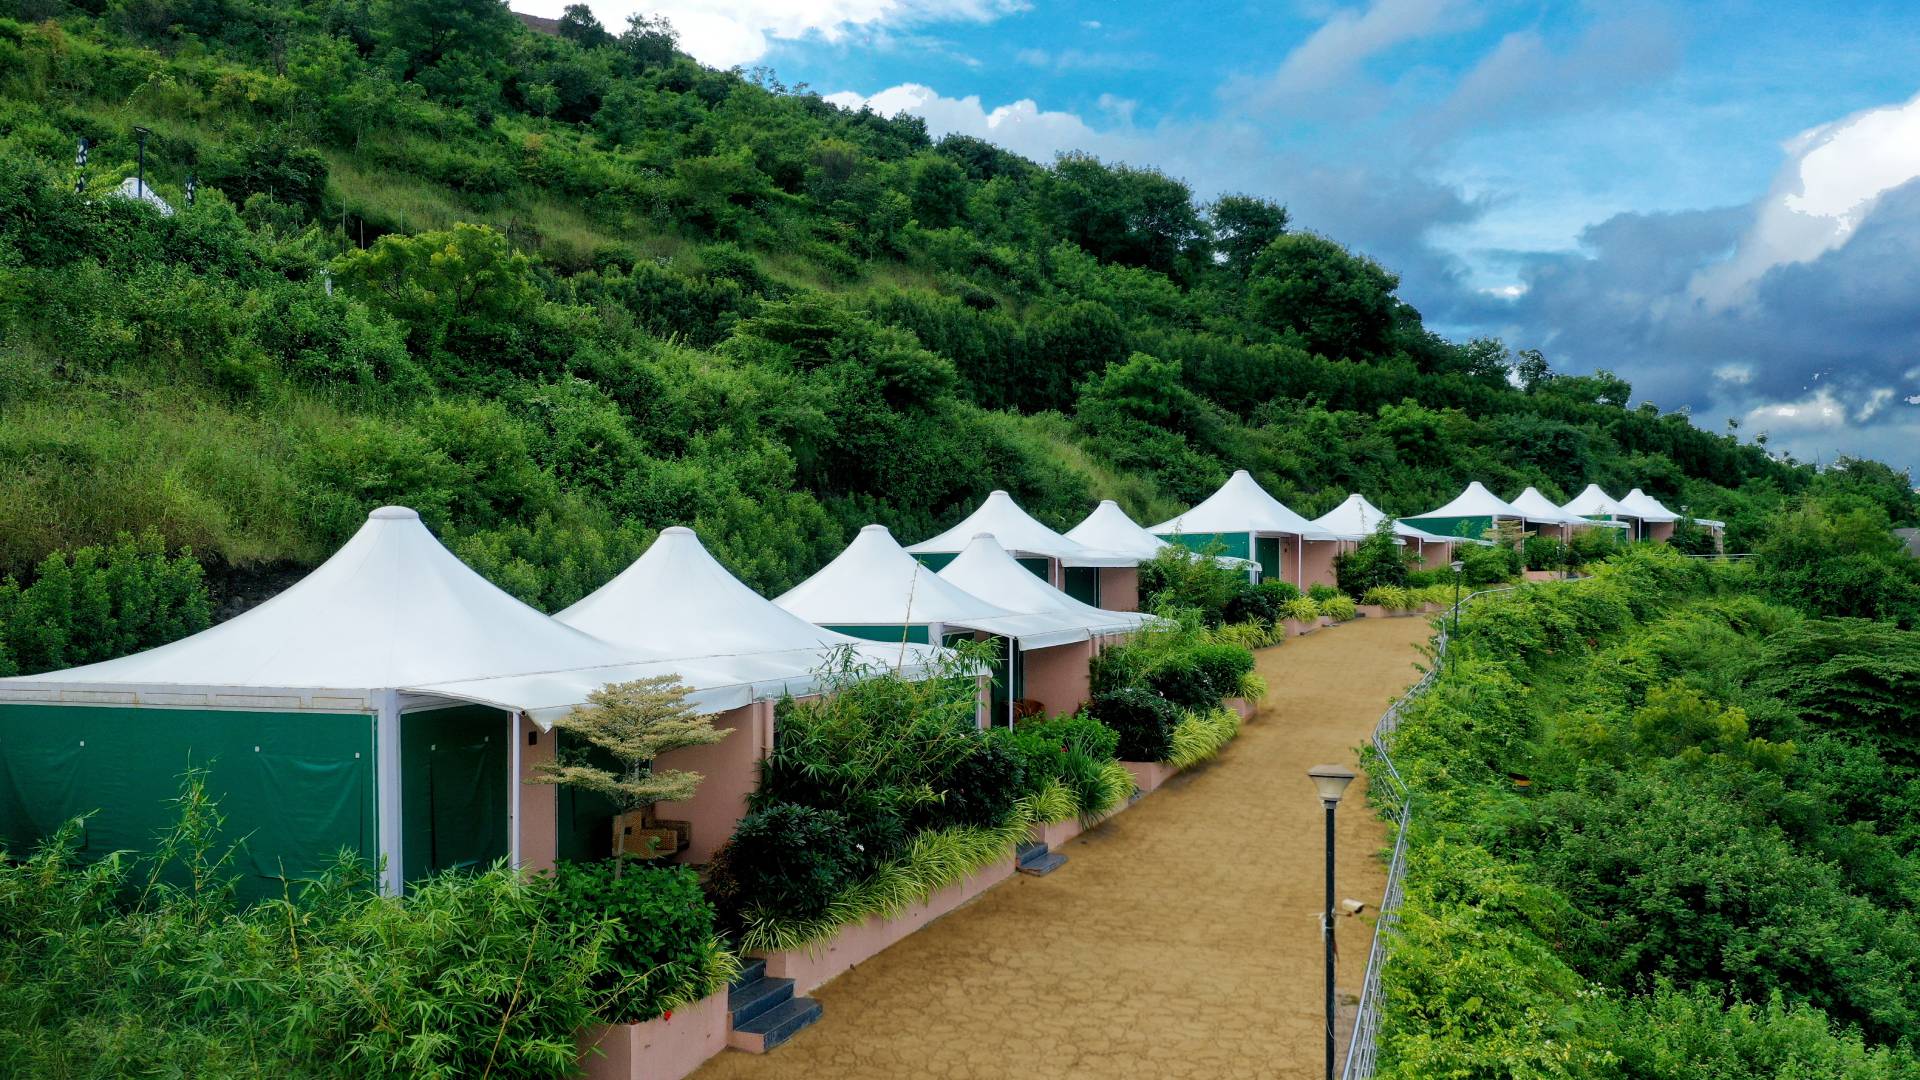 THE SAPPHIRE TENTS - HILL TOP FAMILY TENTS at Sunny's World Pune (5)